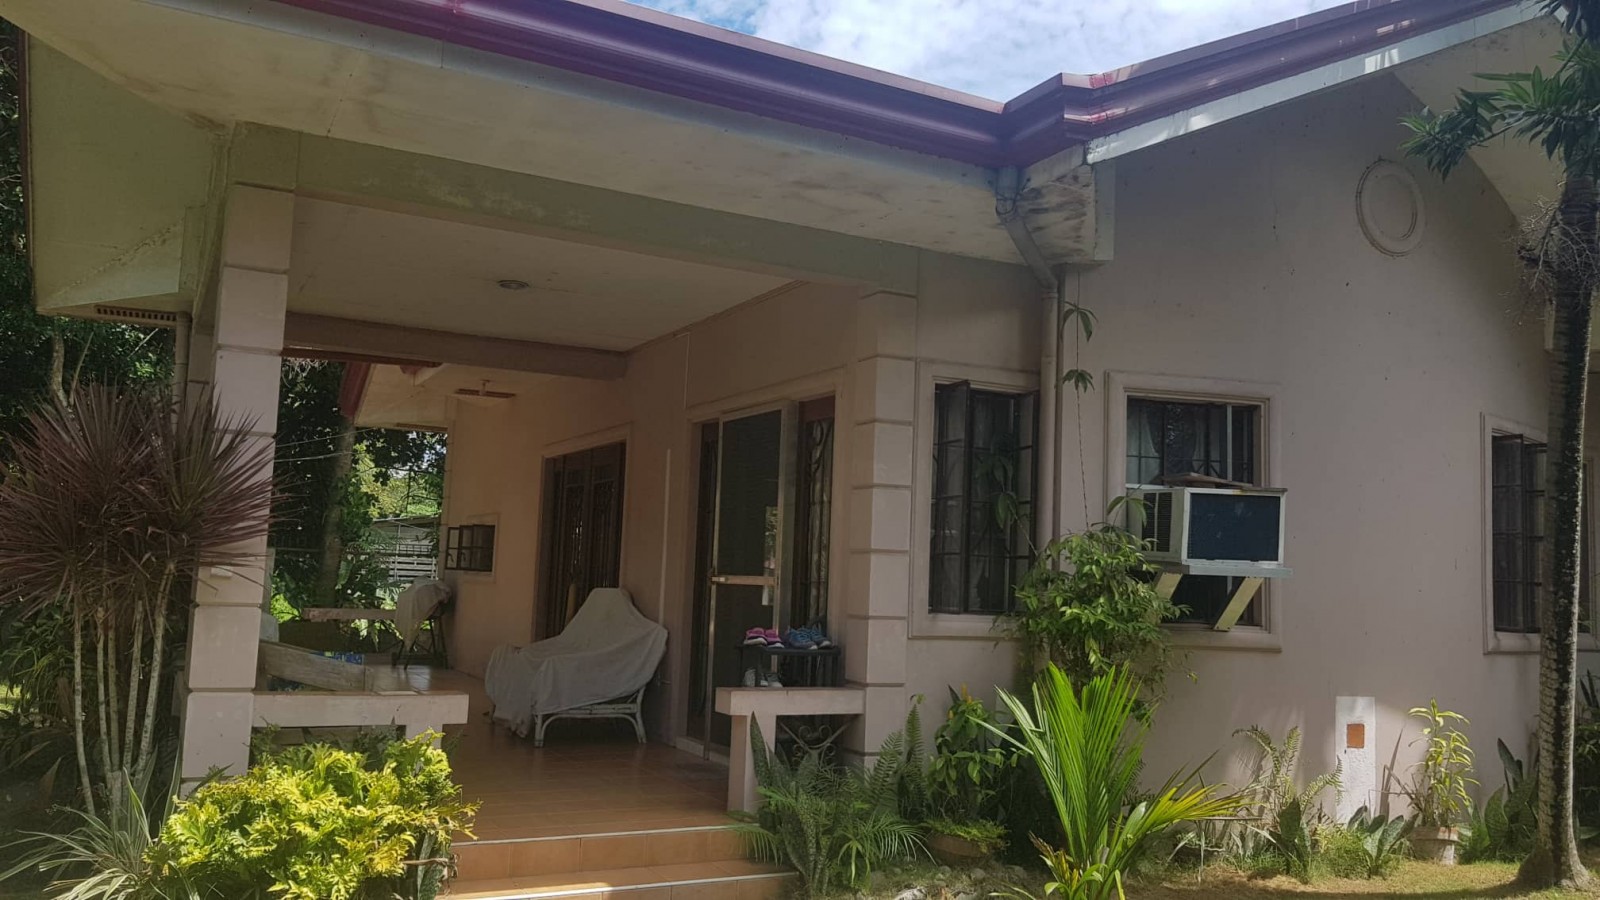 House and Lot in Dumaguete Barangay of Batinguel